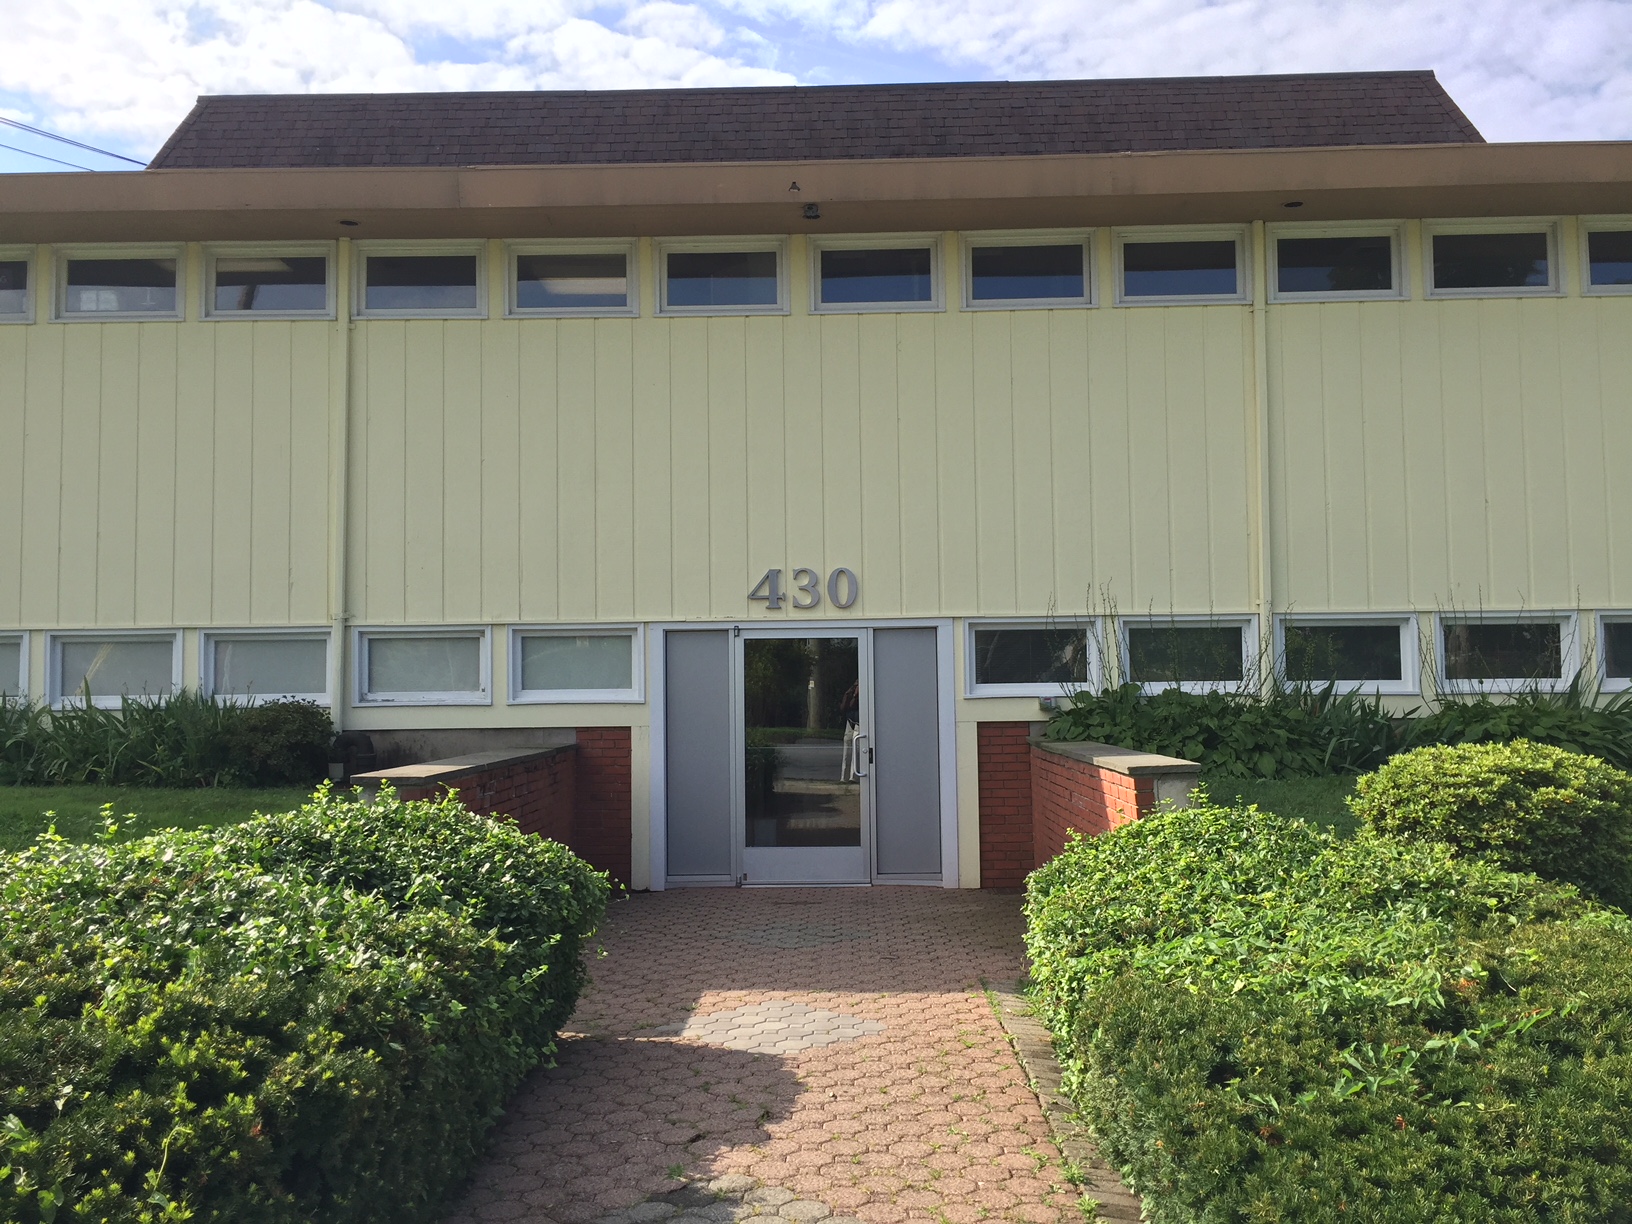 For Lease - Professional Offices - Cor Location